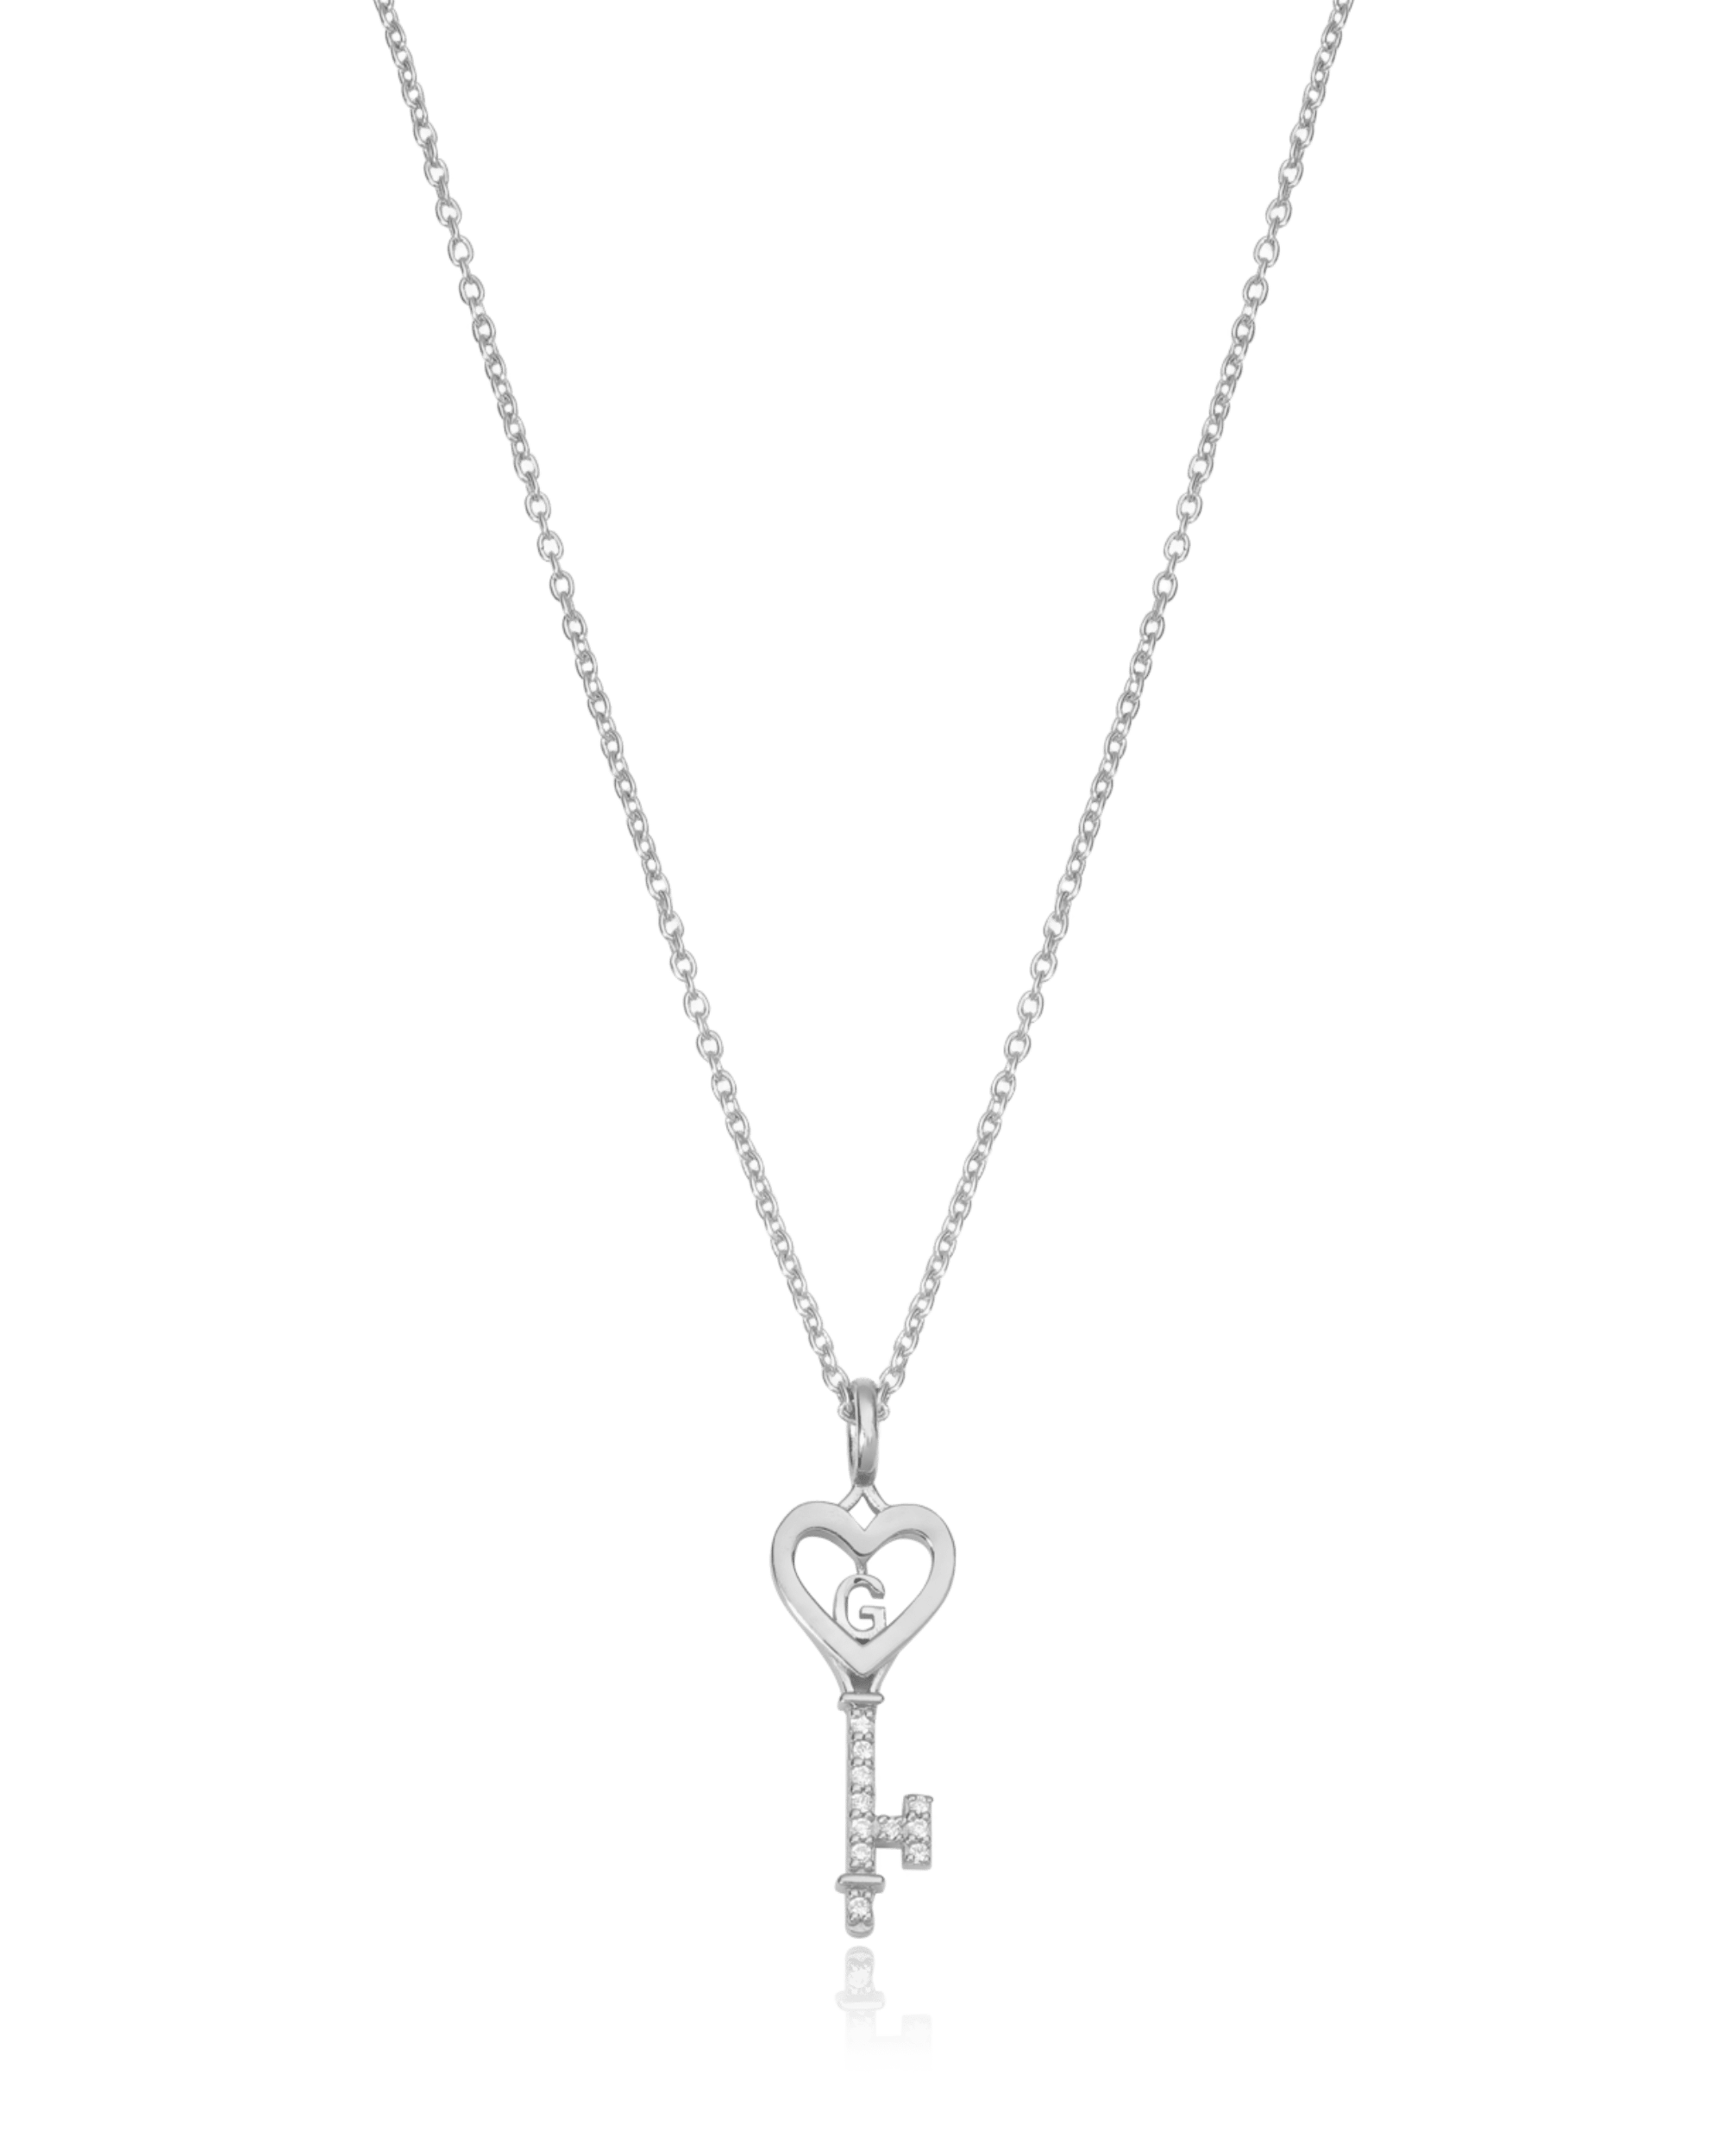 Key To My Heart Necklace with Diamond - 18K Gold Vermeil Necklaces magal-dev 